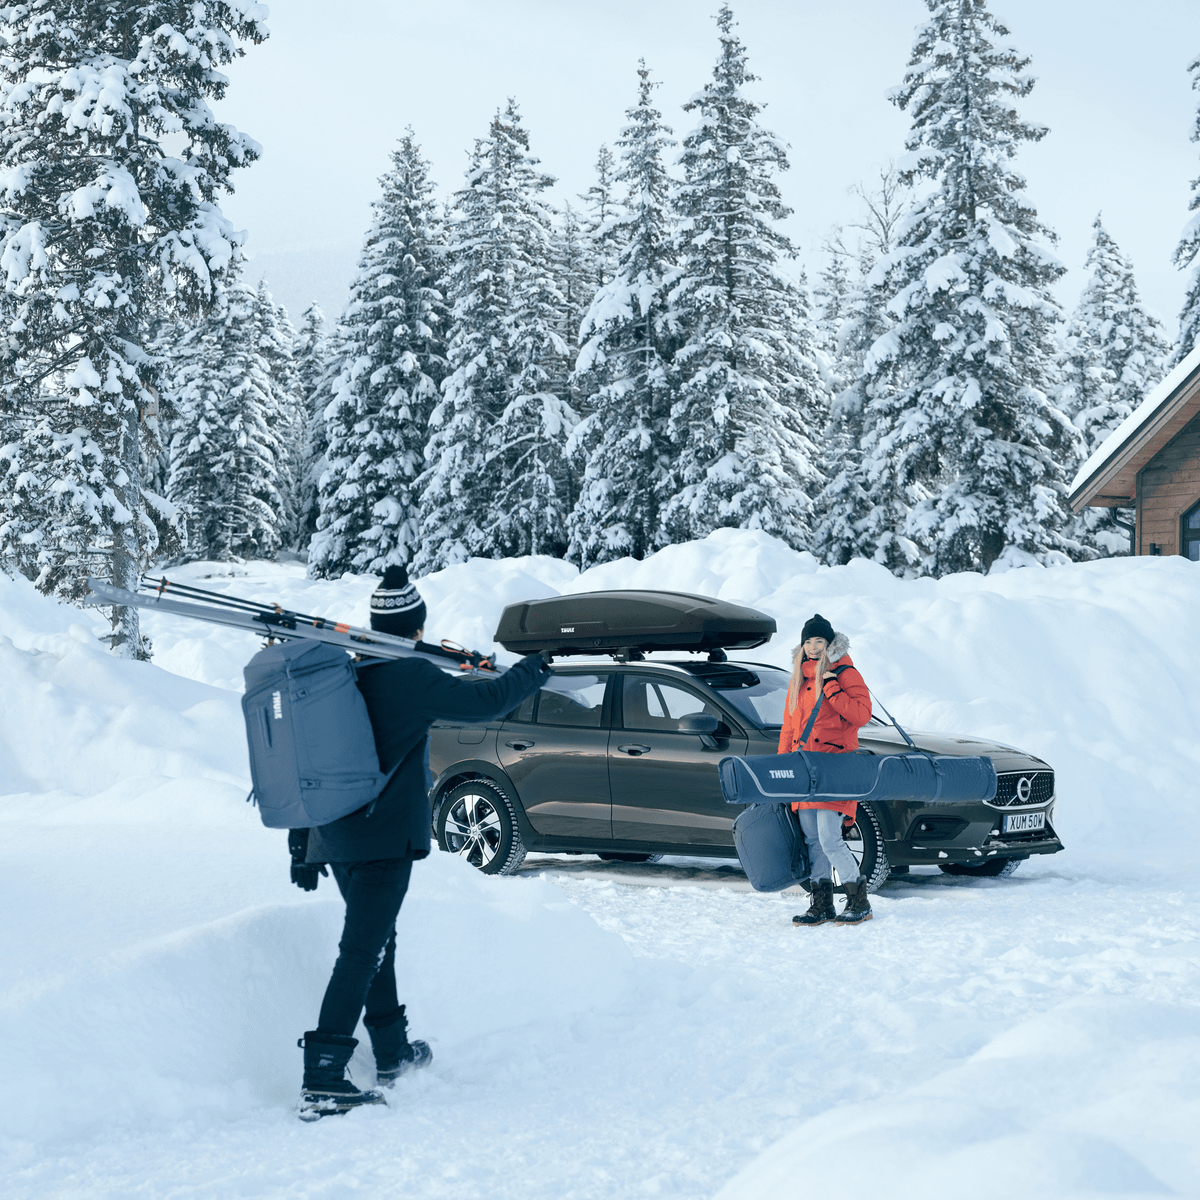 A woman carrying a  Thule RoundTrip Ski Bag stands by a car in the snow saying hi to a man carrying skis.